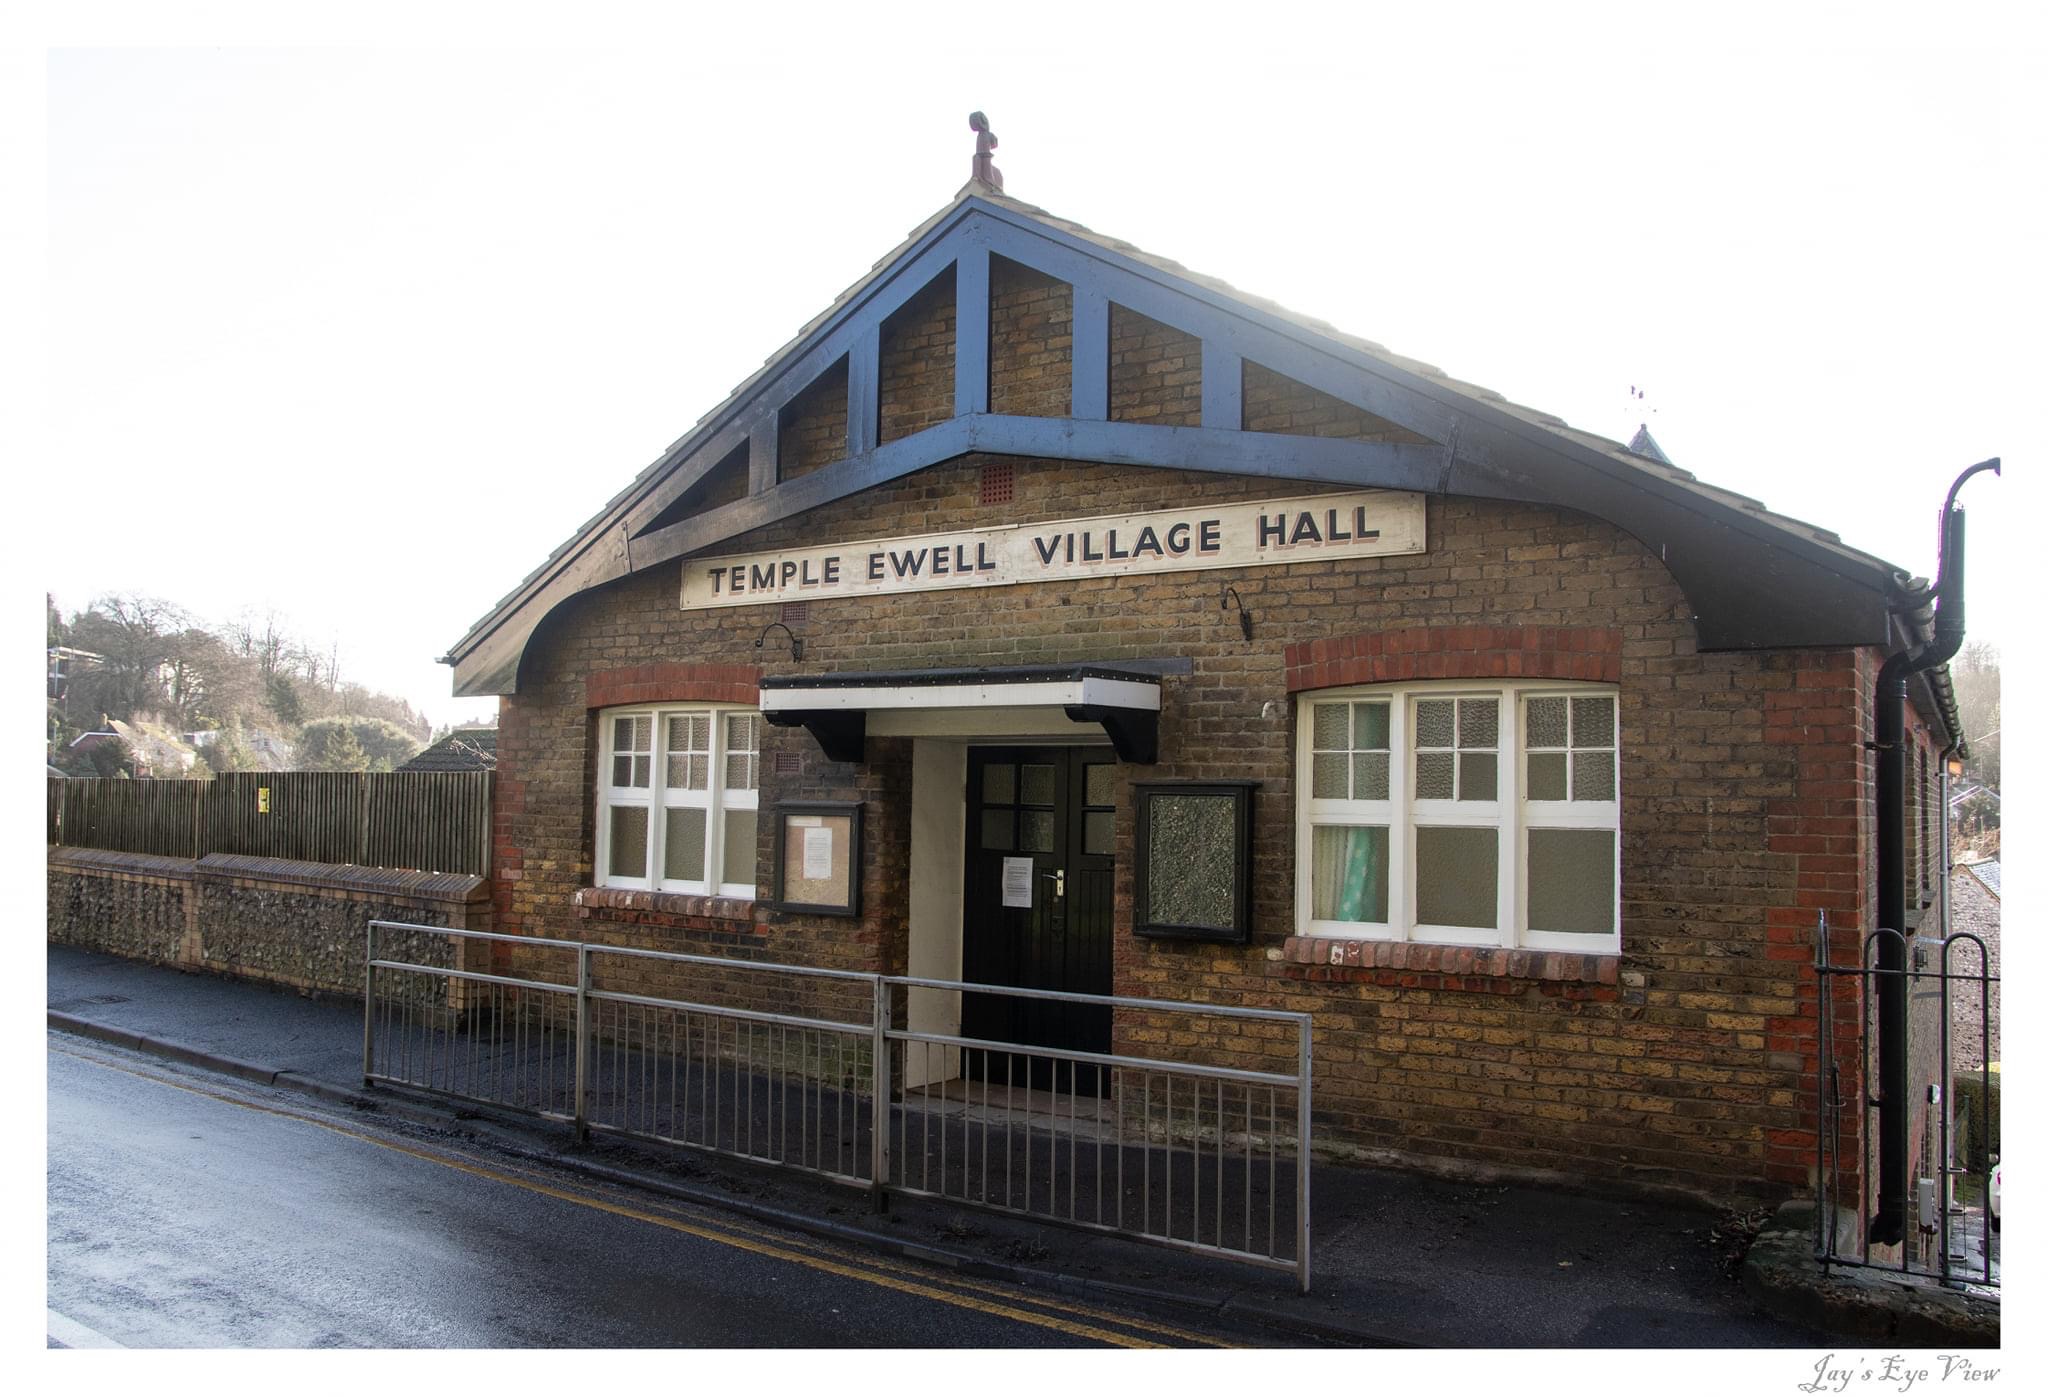 Meetings are held in the Lower Village Hall